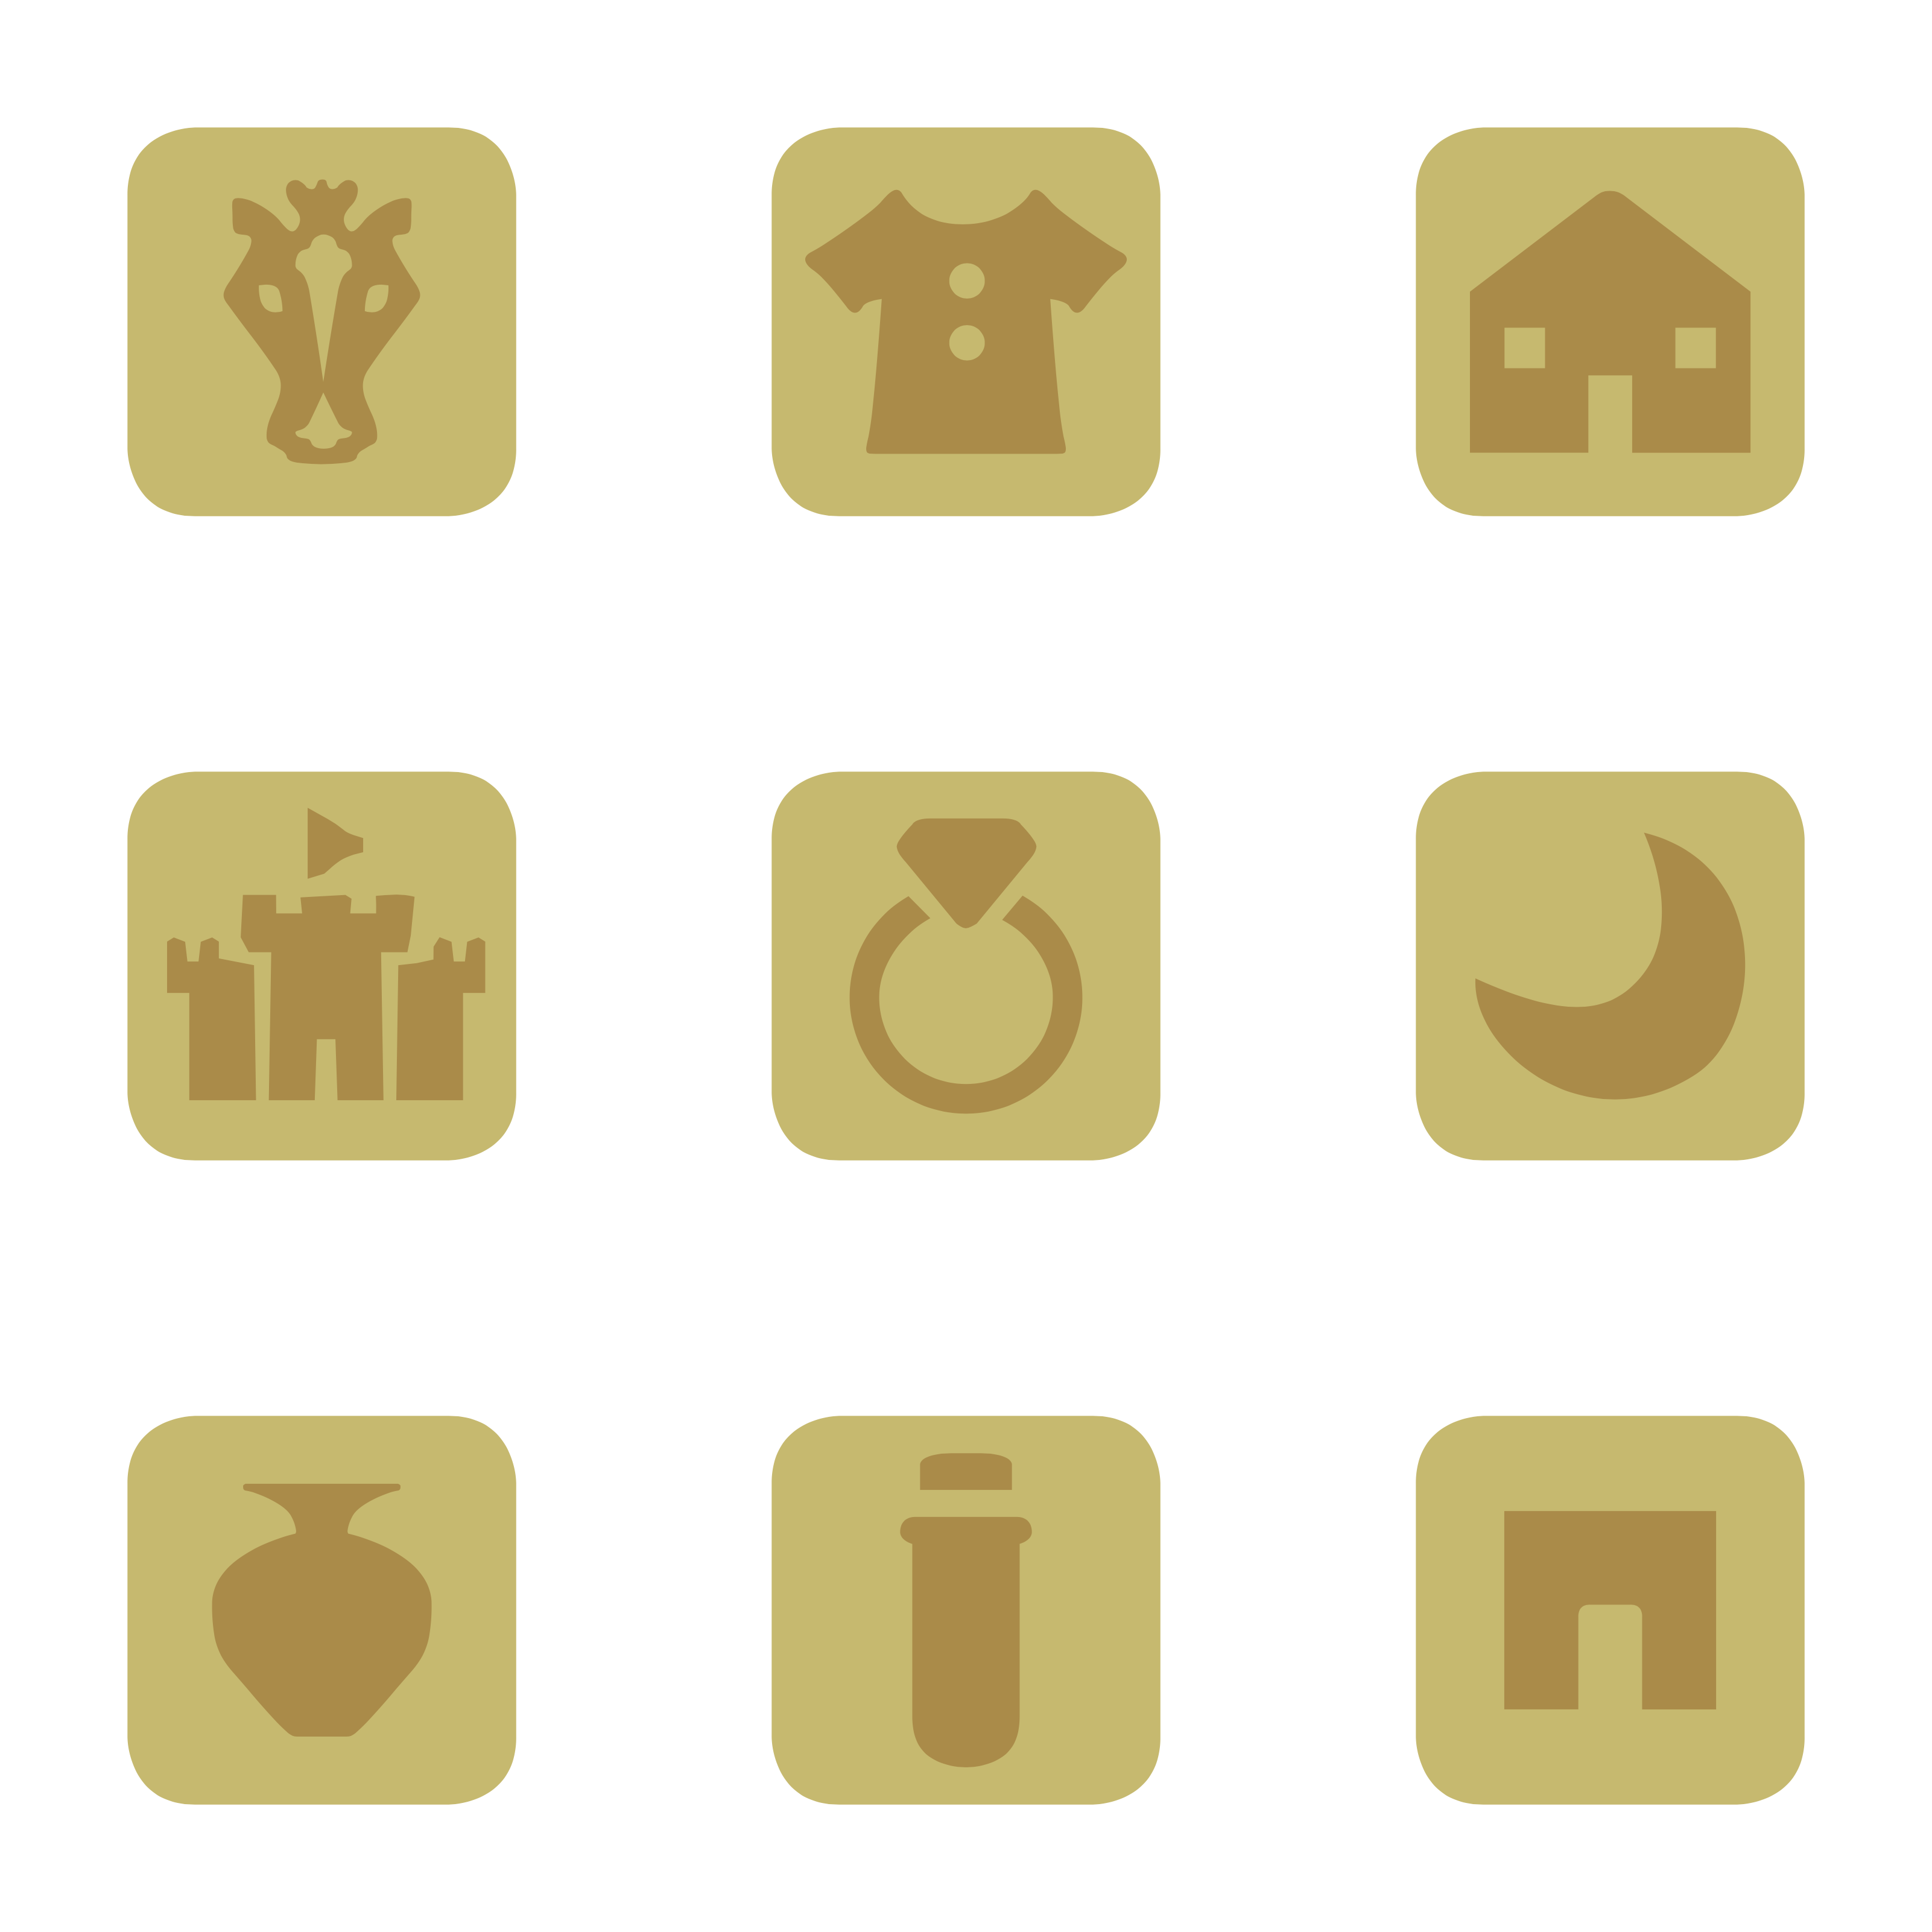 The Legend of Zelda: Breath of the Wild - Location Icons